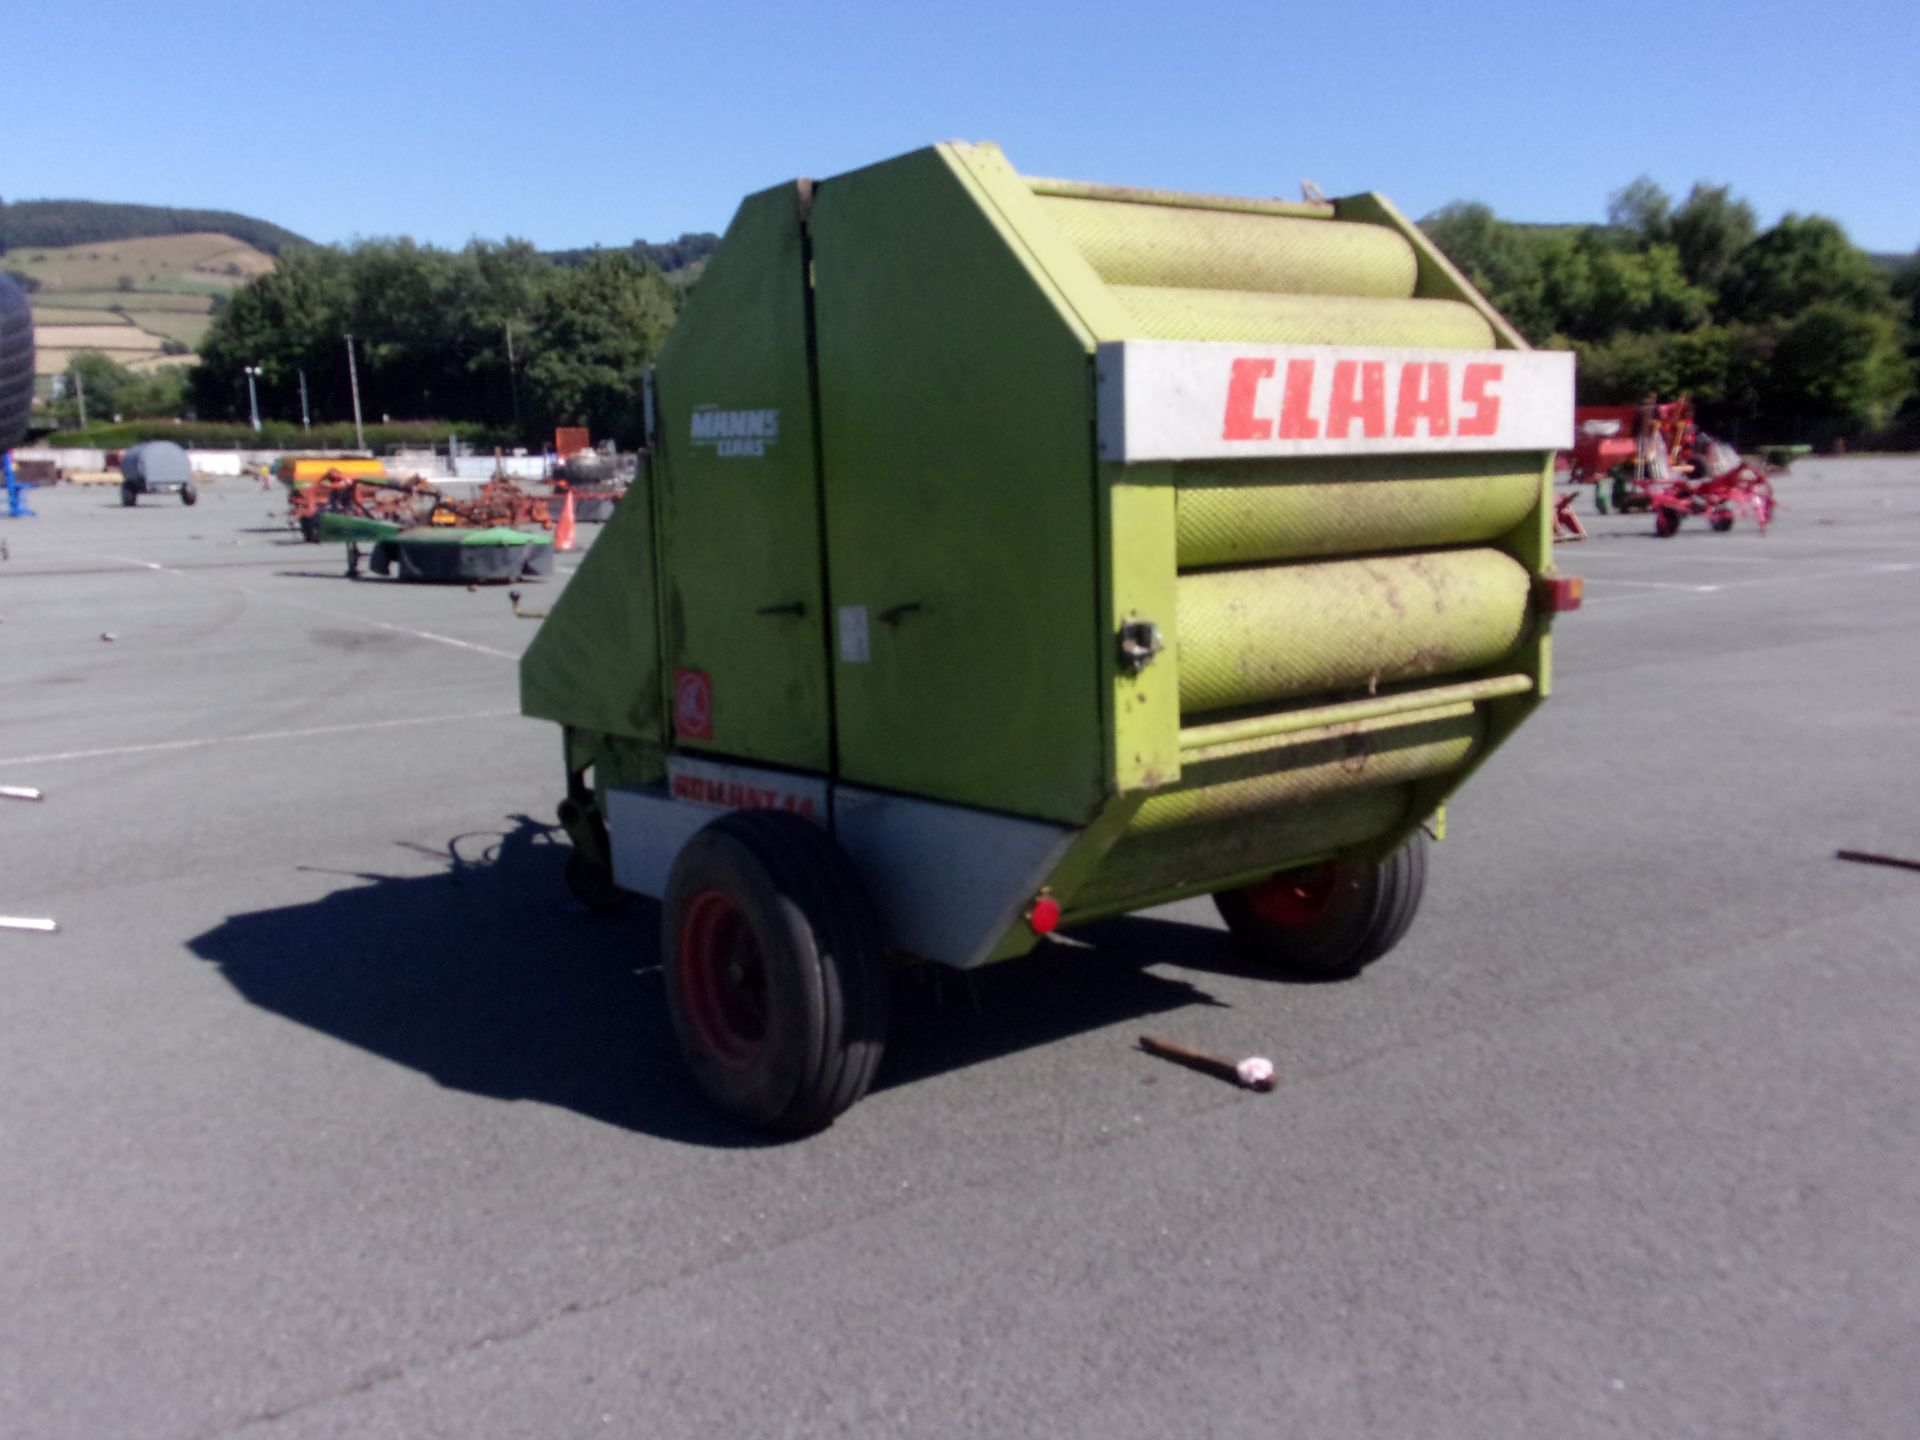 ROLLANT 44 CLAAS ROUND BALER - Image 3 of 4